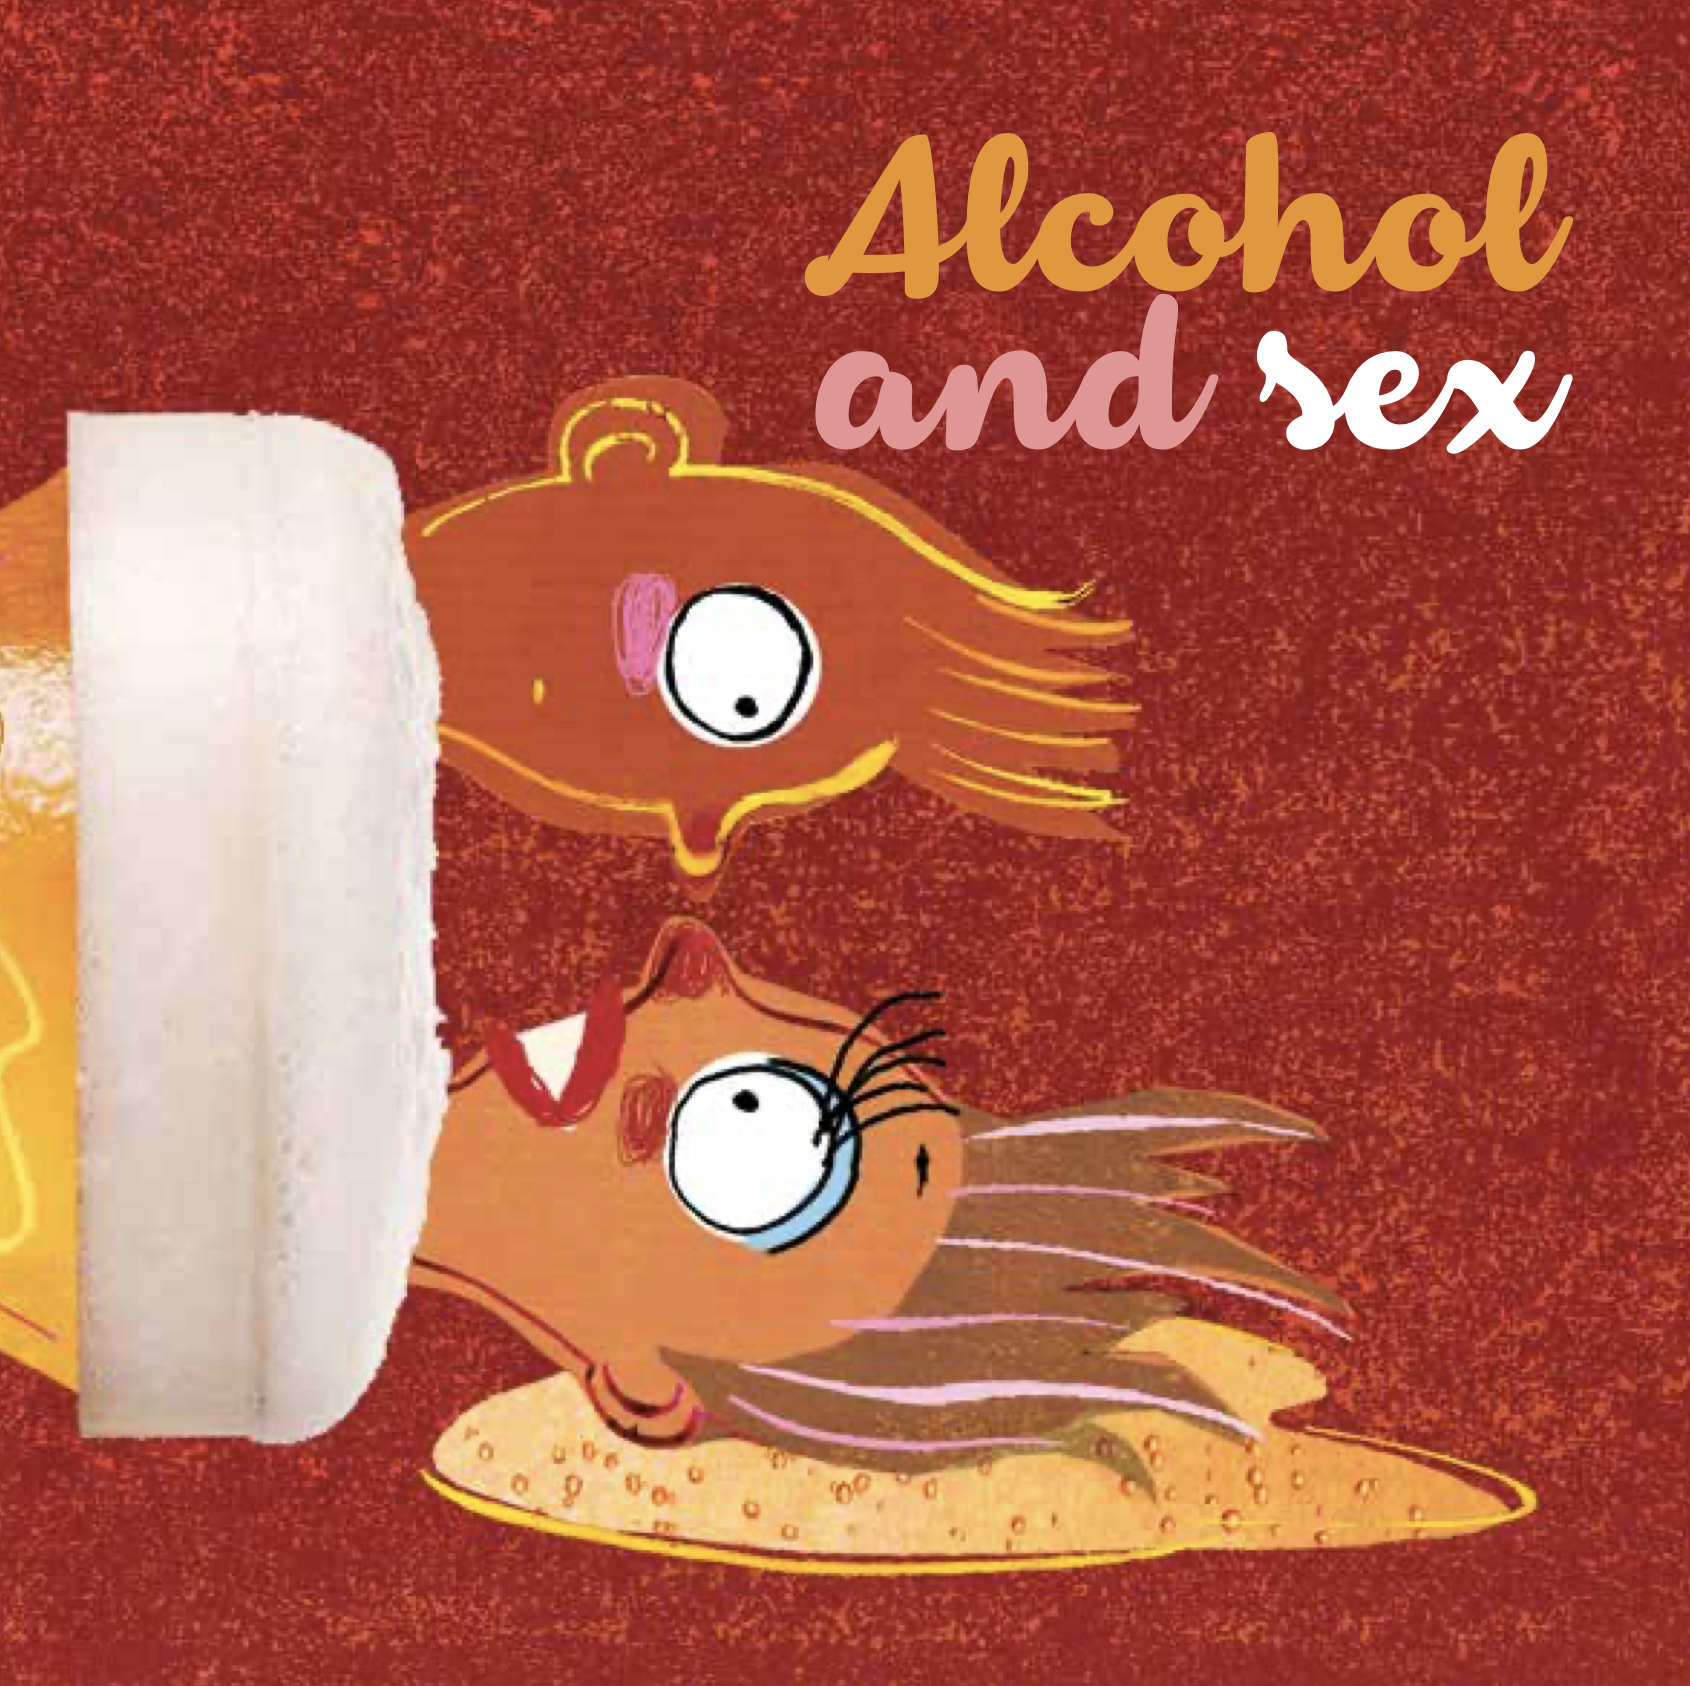 Alcohol and sex